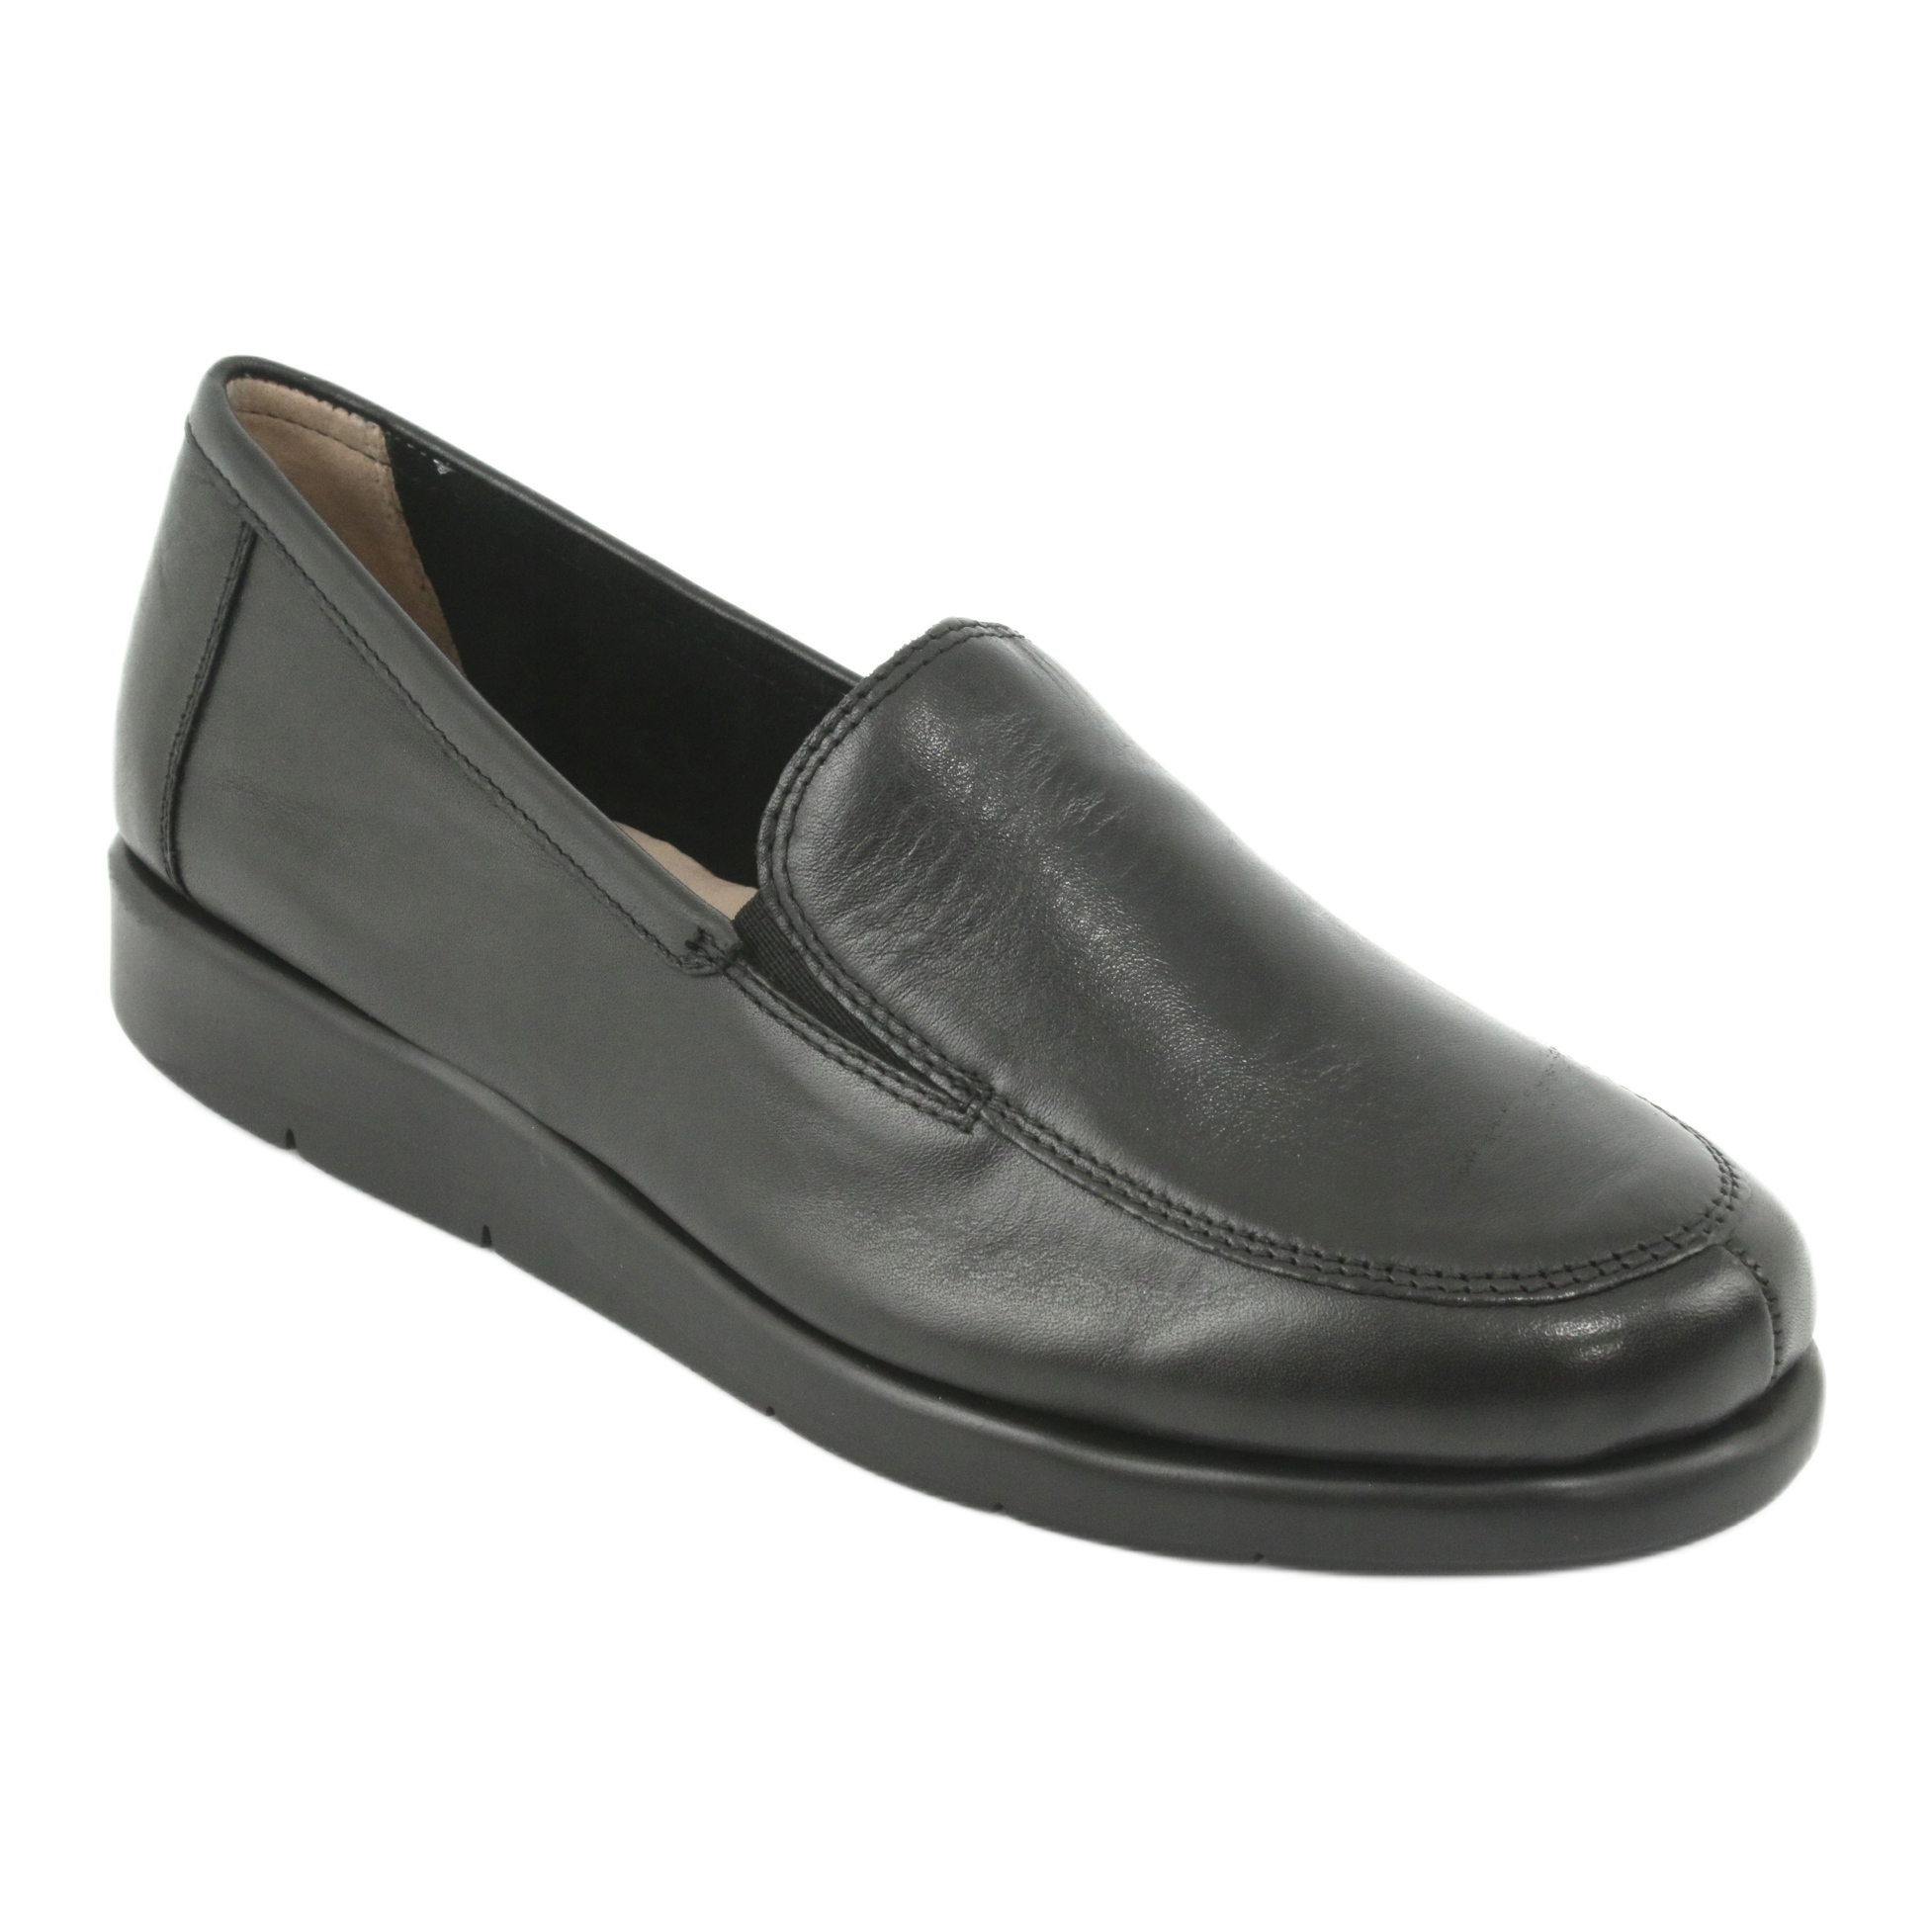 Caprice loafers comfort 24751 black - KeeShoes